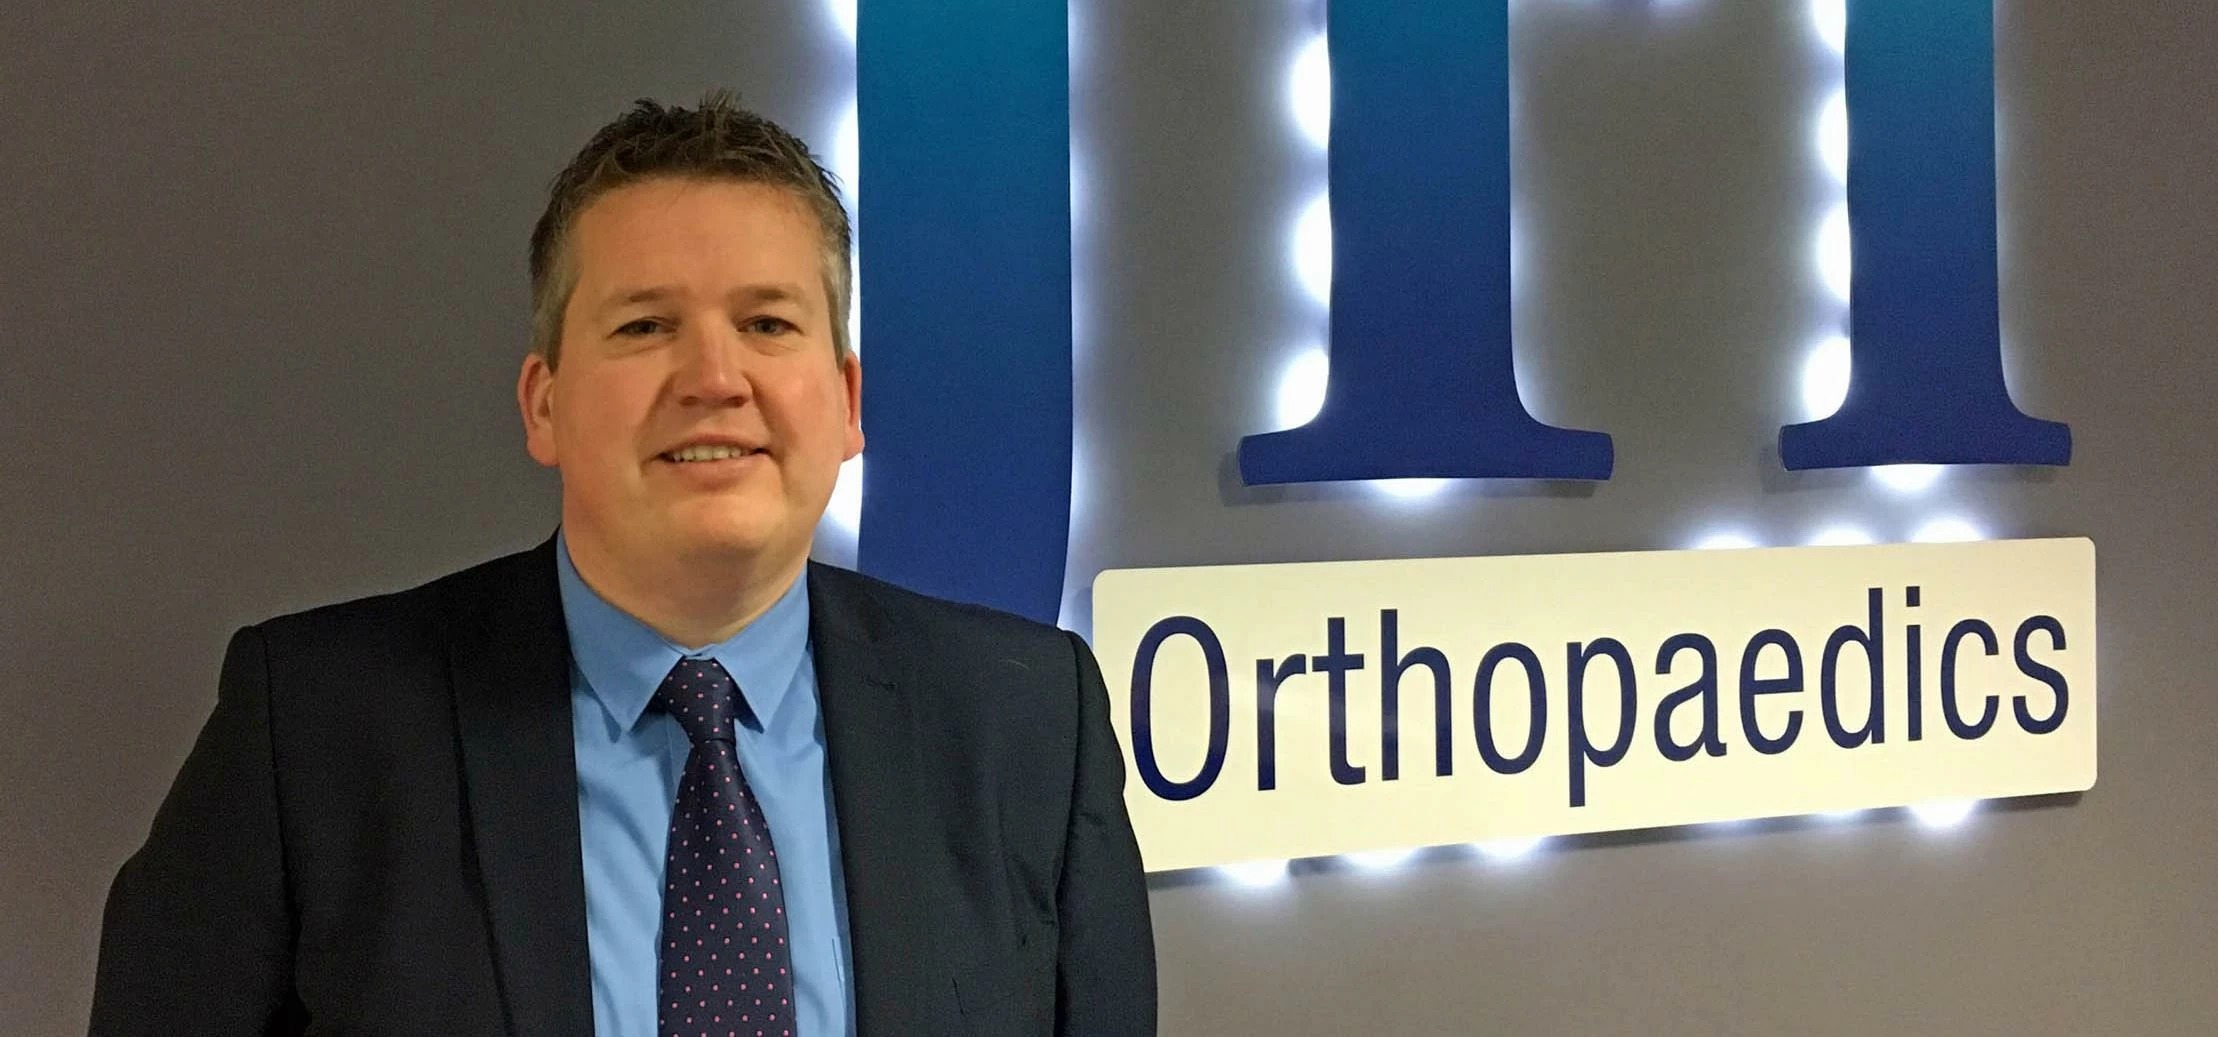 Alistair Wheatley, the new UK Business Manager at JRI Orthopaedics